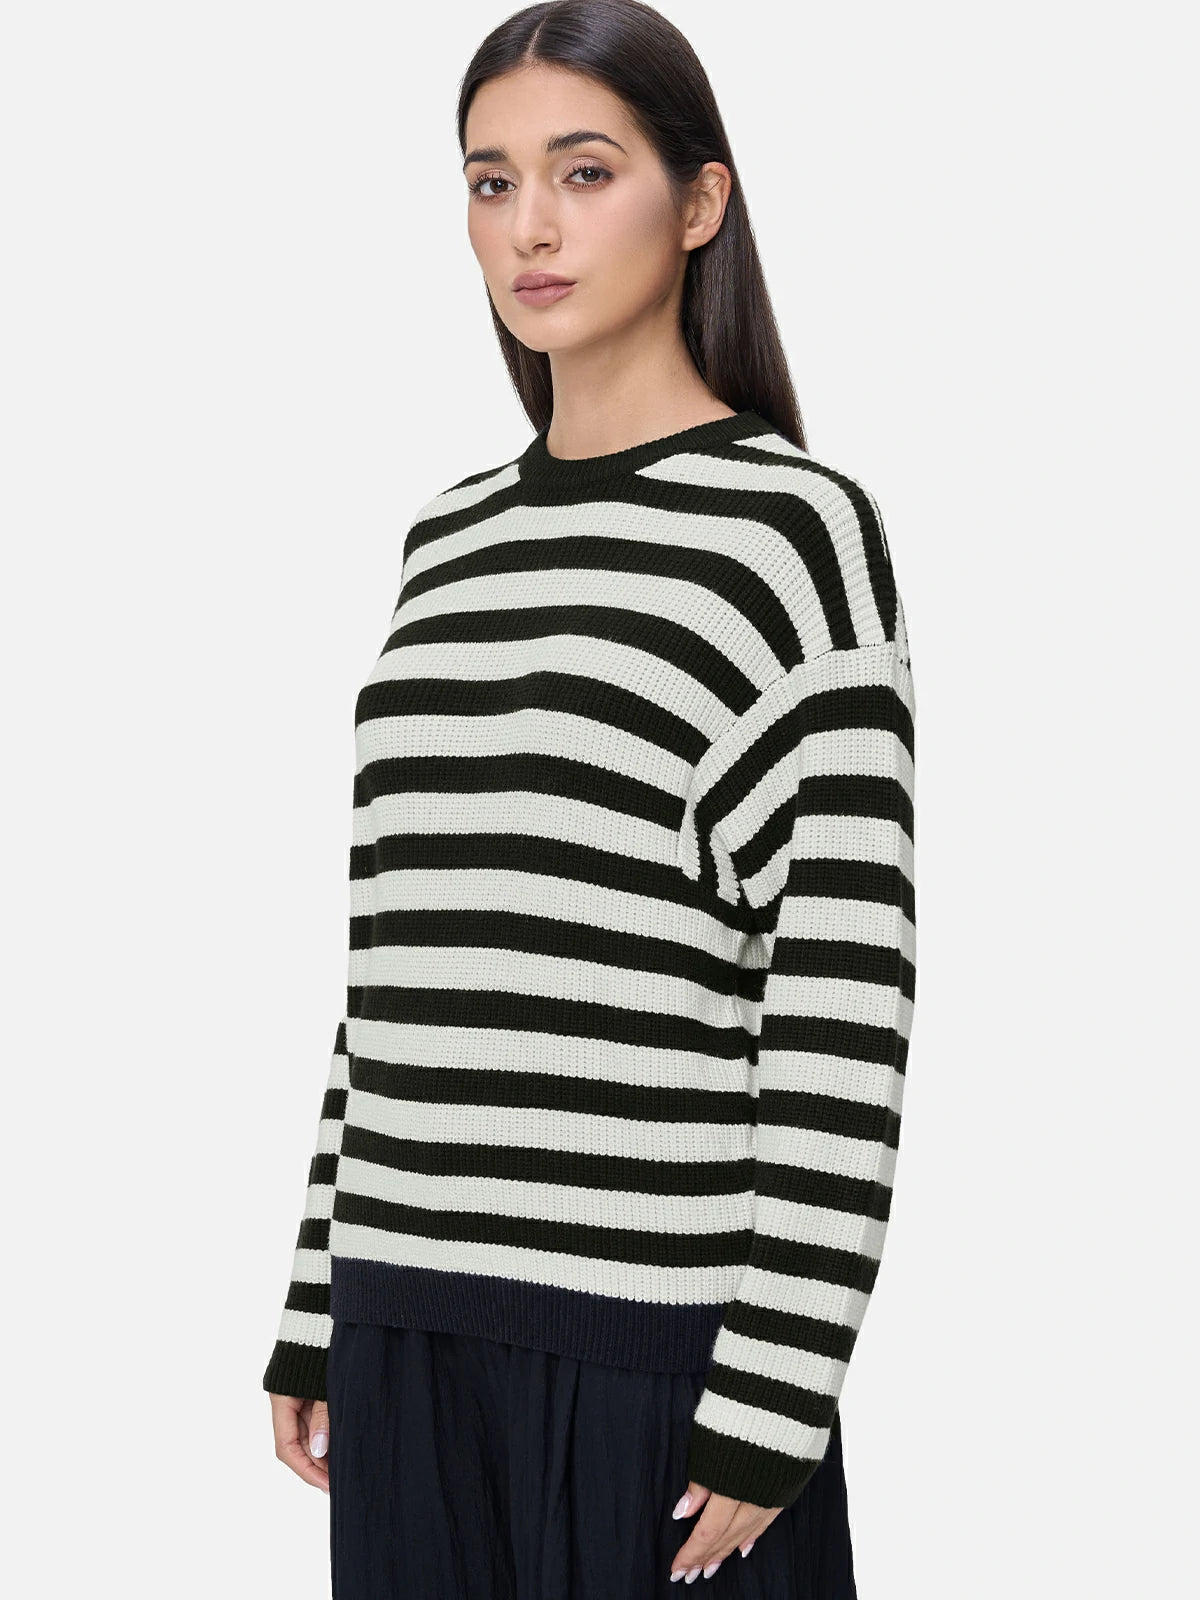 Elevate your wardrobe with this chic sweater, featuring classic black and white stripes, ribbed texture, and a comfortable round neckline for a timeless and stylish look.